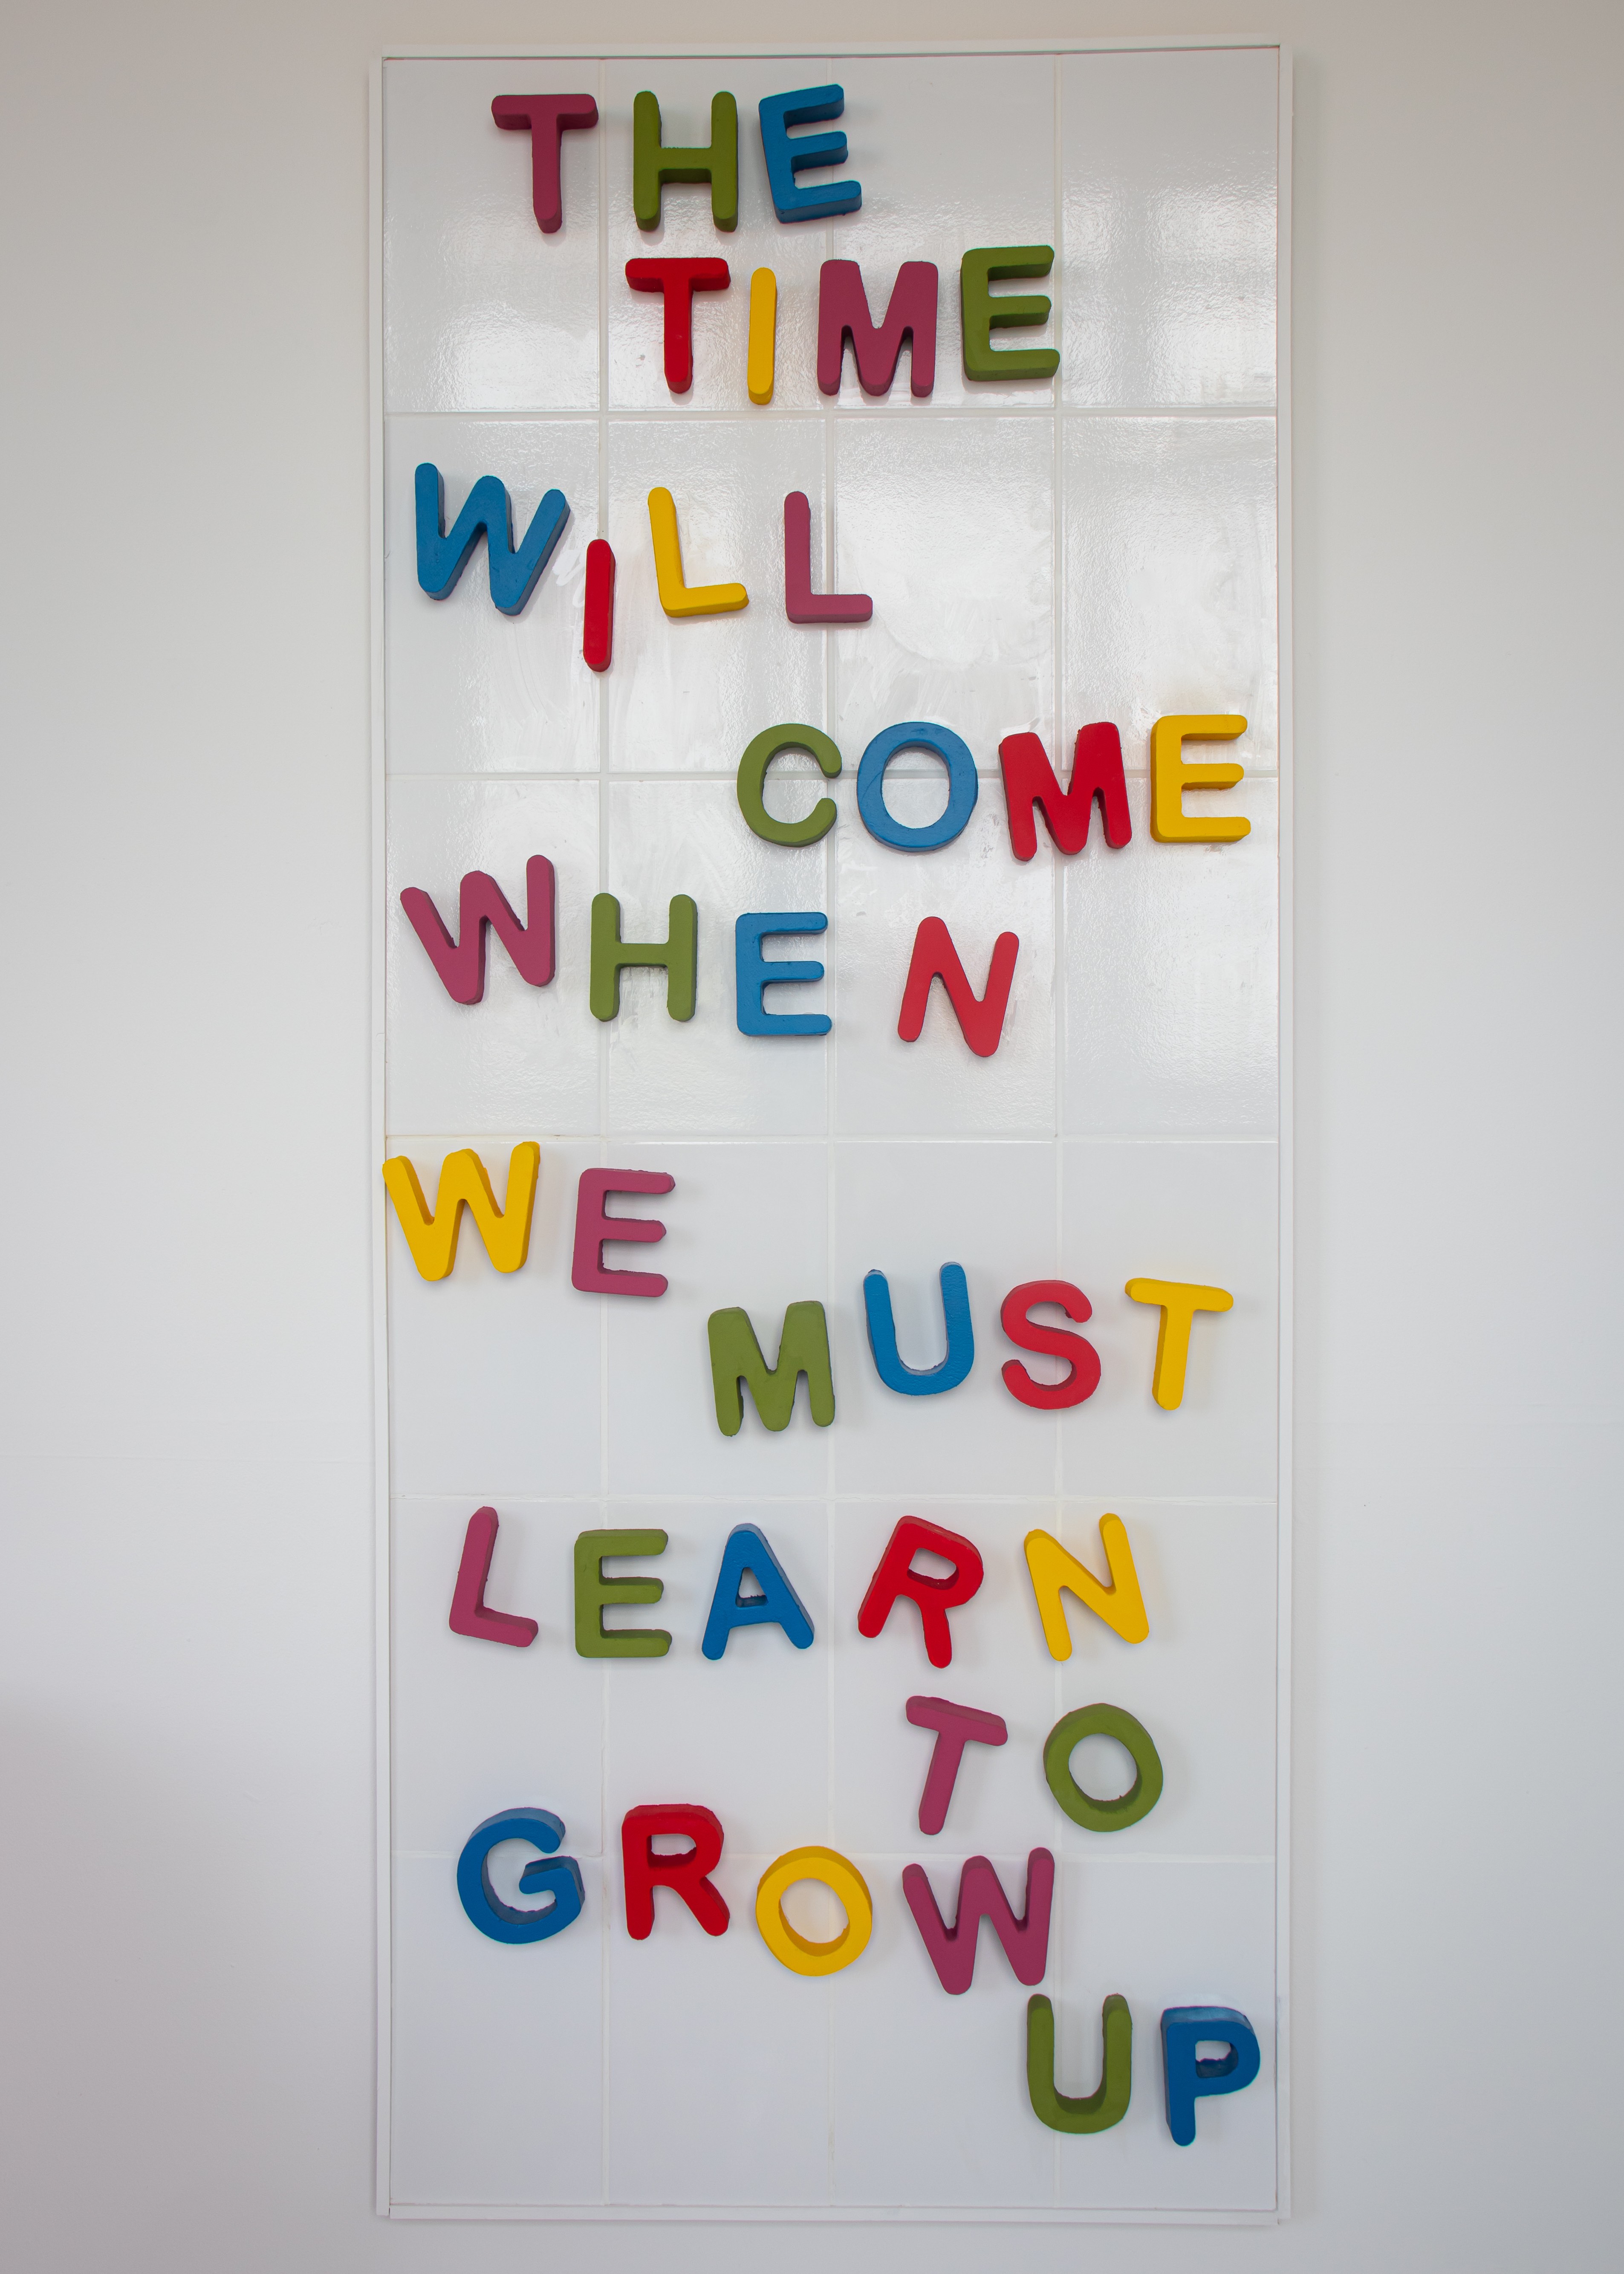 Fine Art work by Georgia Keeling showing a tiled wall with foam lettered sculptures